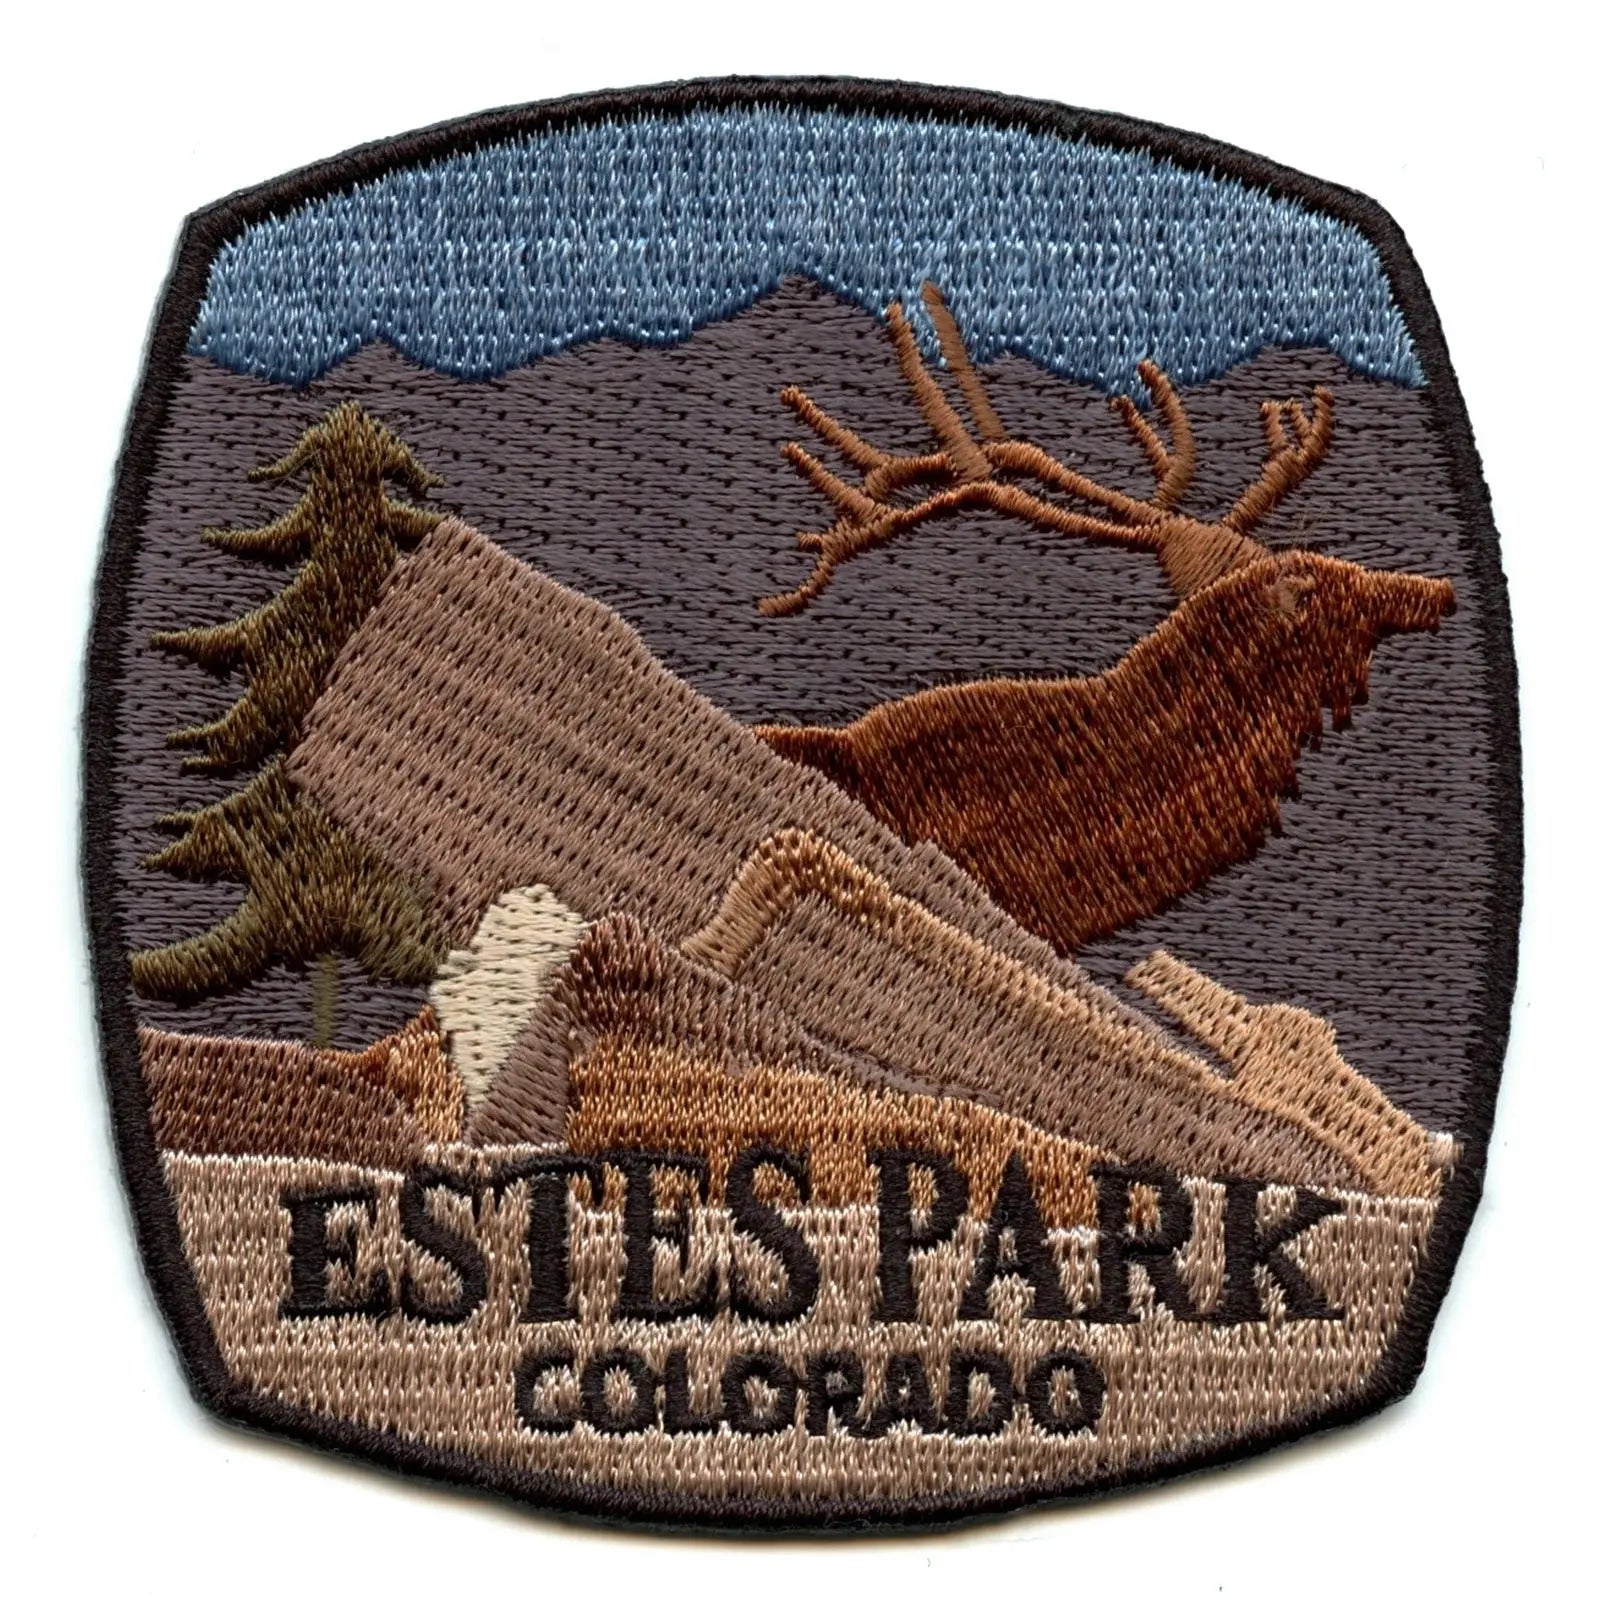 Estes Park Colorado Travel Patch Embroidered Iron On Patch 